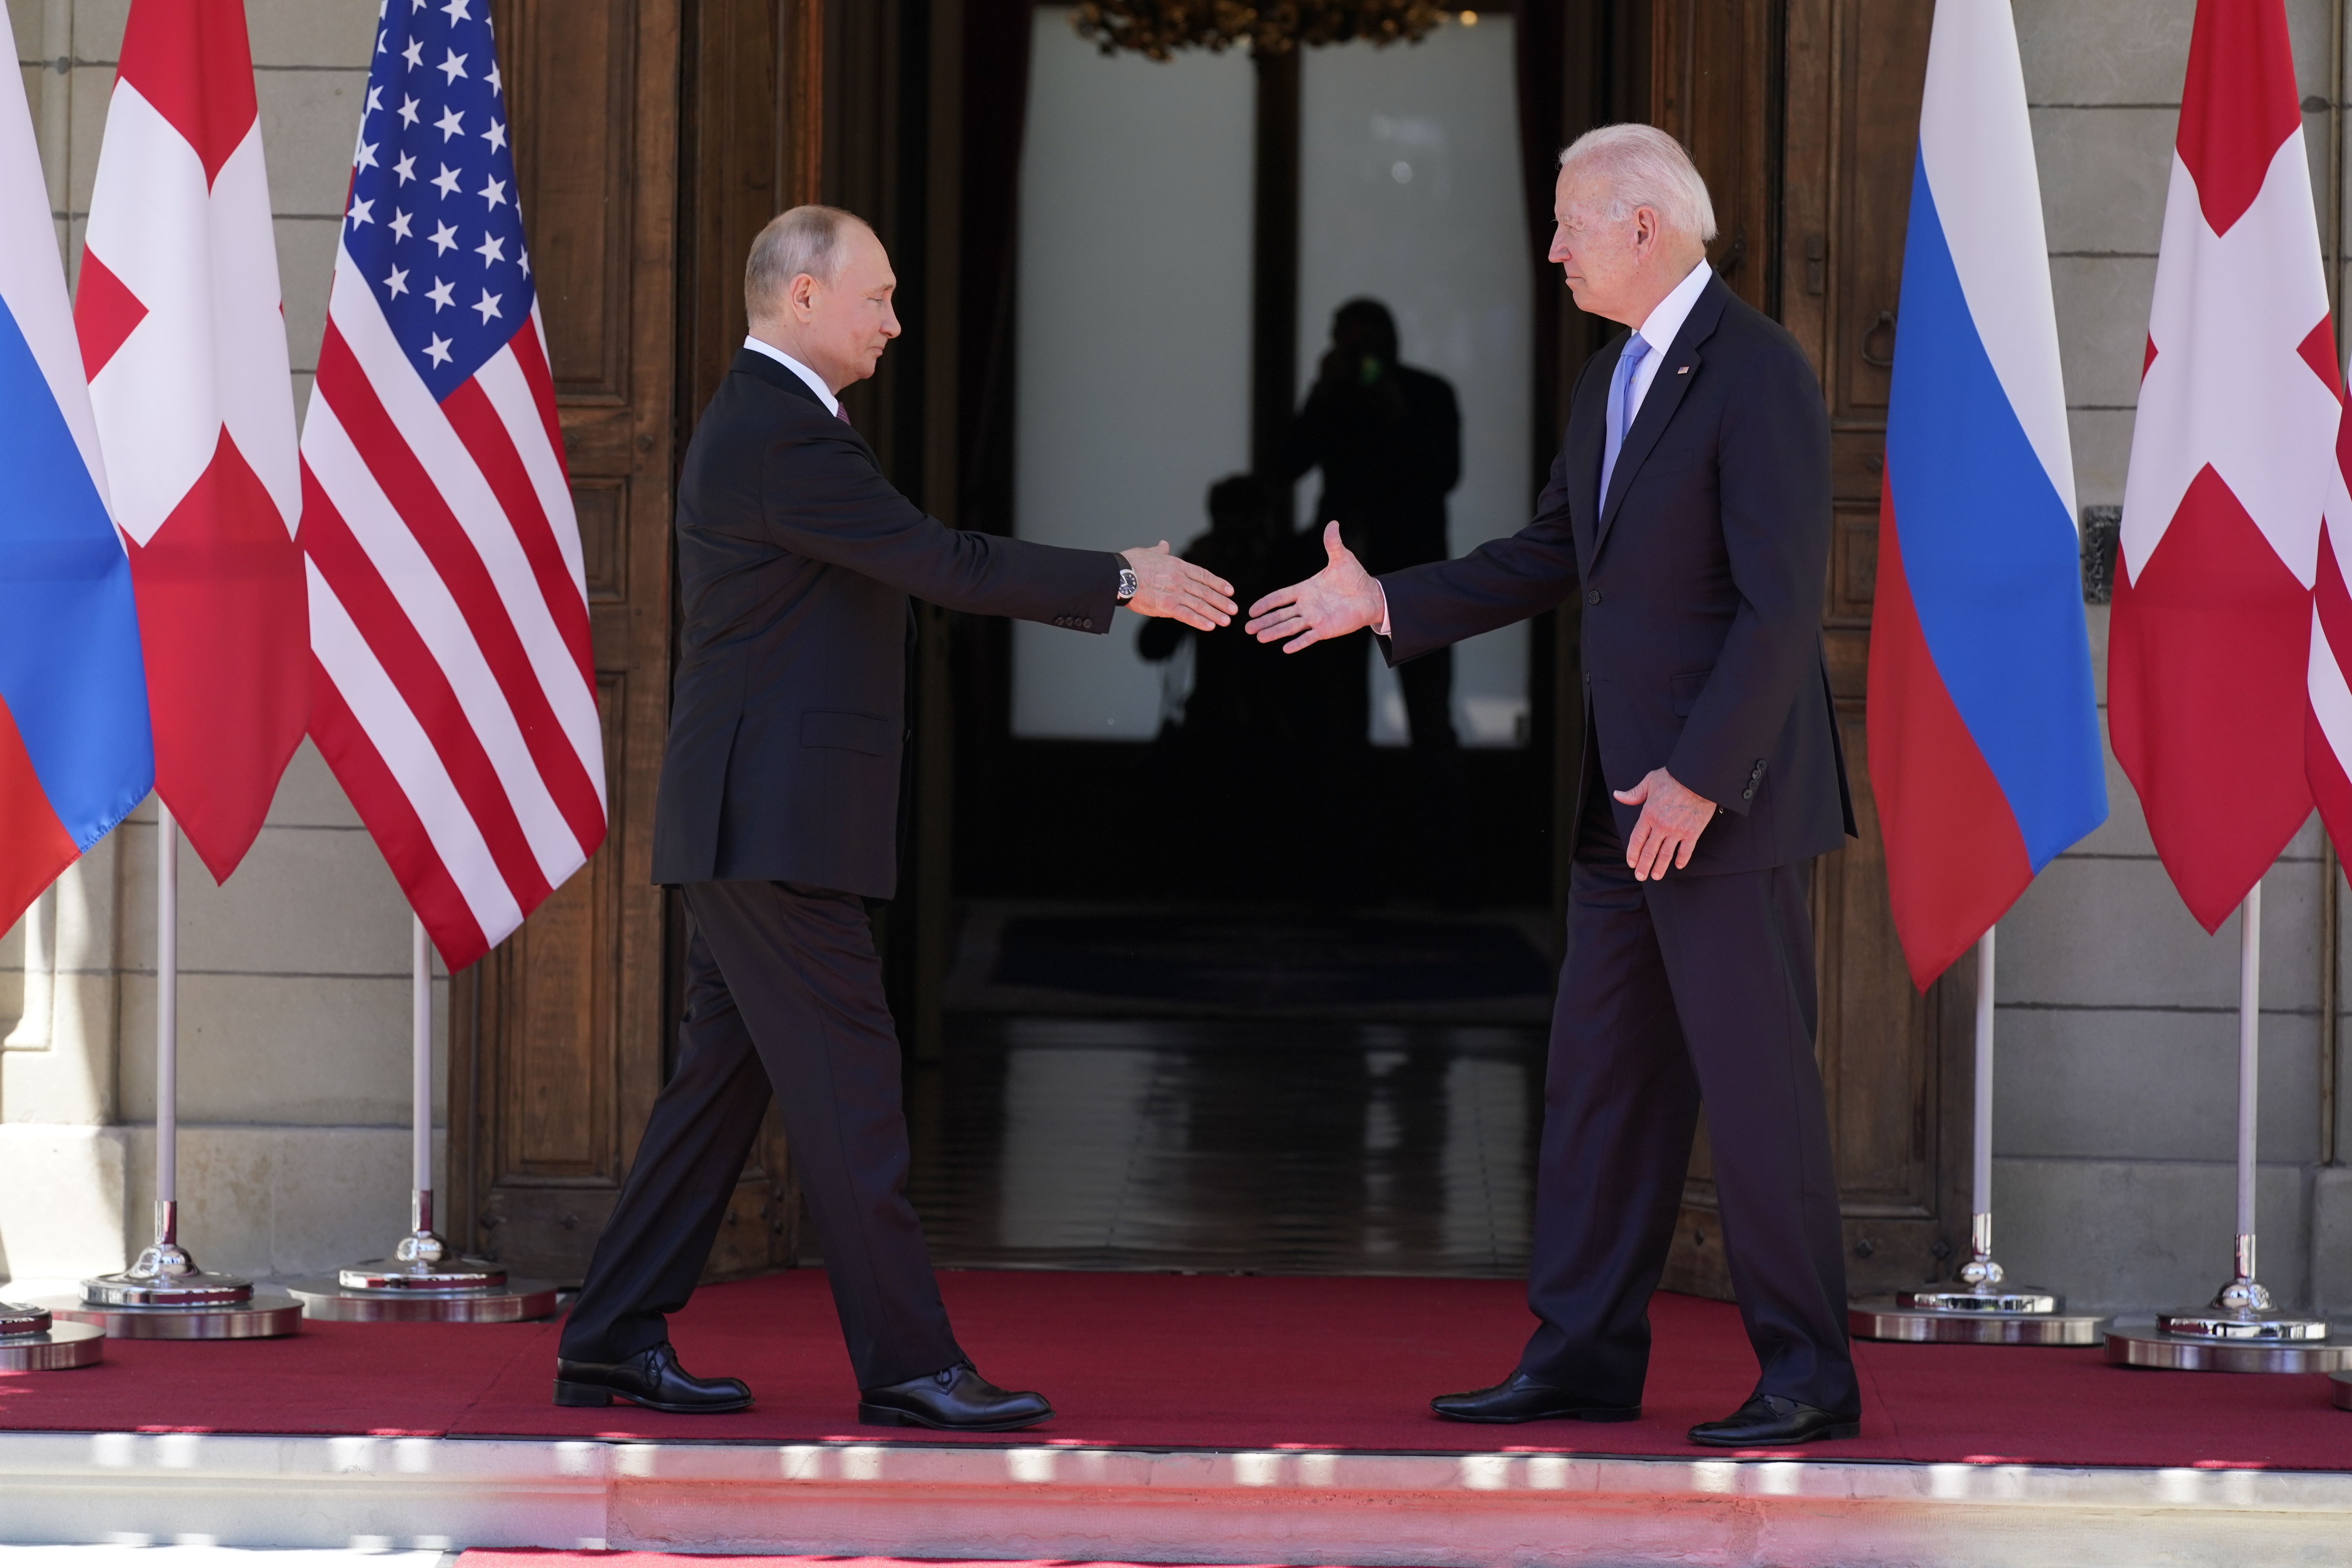 The June 2021 US-Russian Summit: An Analysis